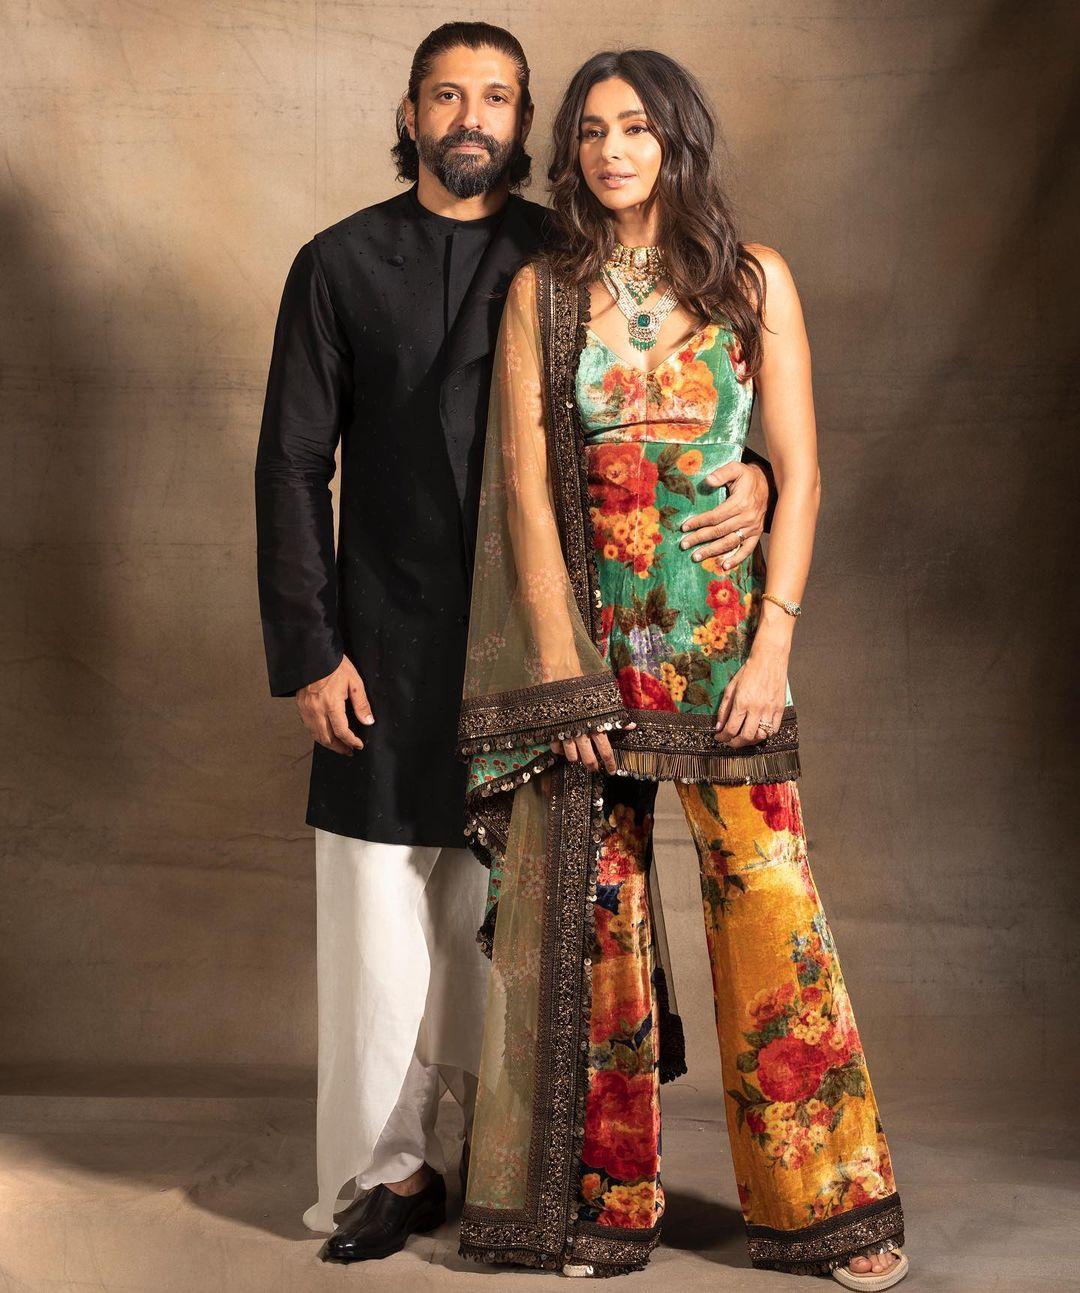  Shibani wore a stunning printed kurta set paired with matching palazzo pants and a sheer dupatta. Farhan complemented her in a classic black kurta pyjama